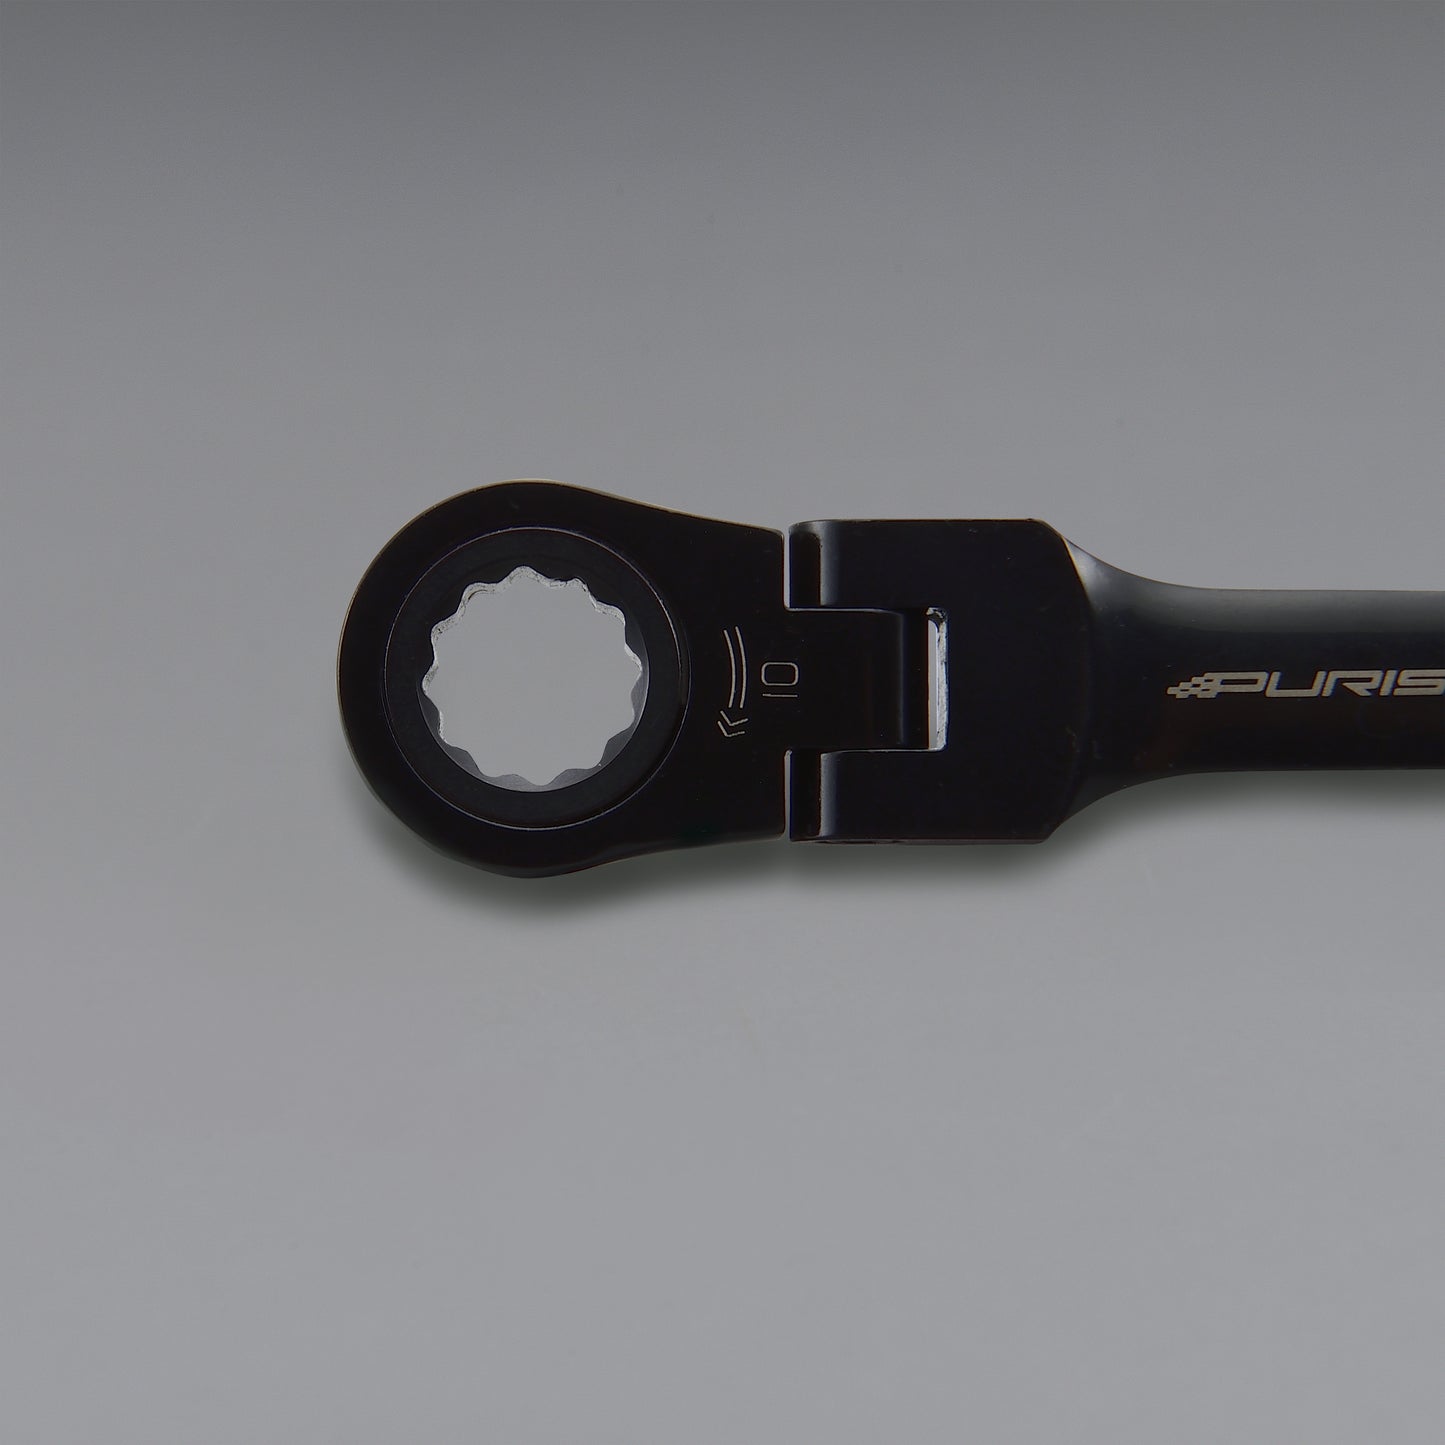 Purist 10mm Flexhead Ratcheting Wrench Keychain (LIMITED EDITION)